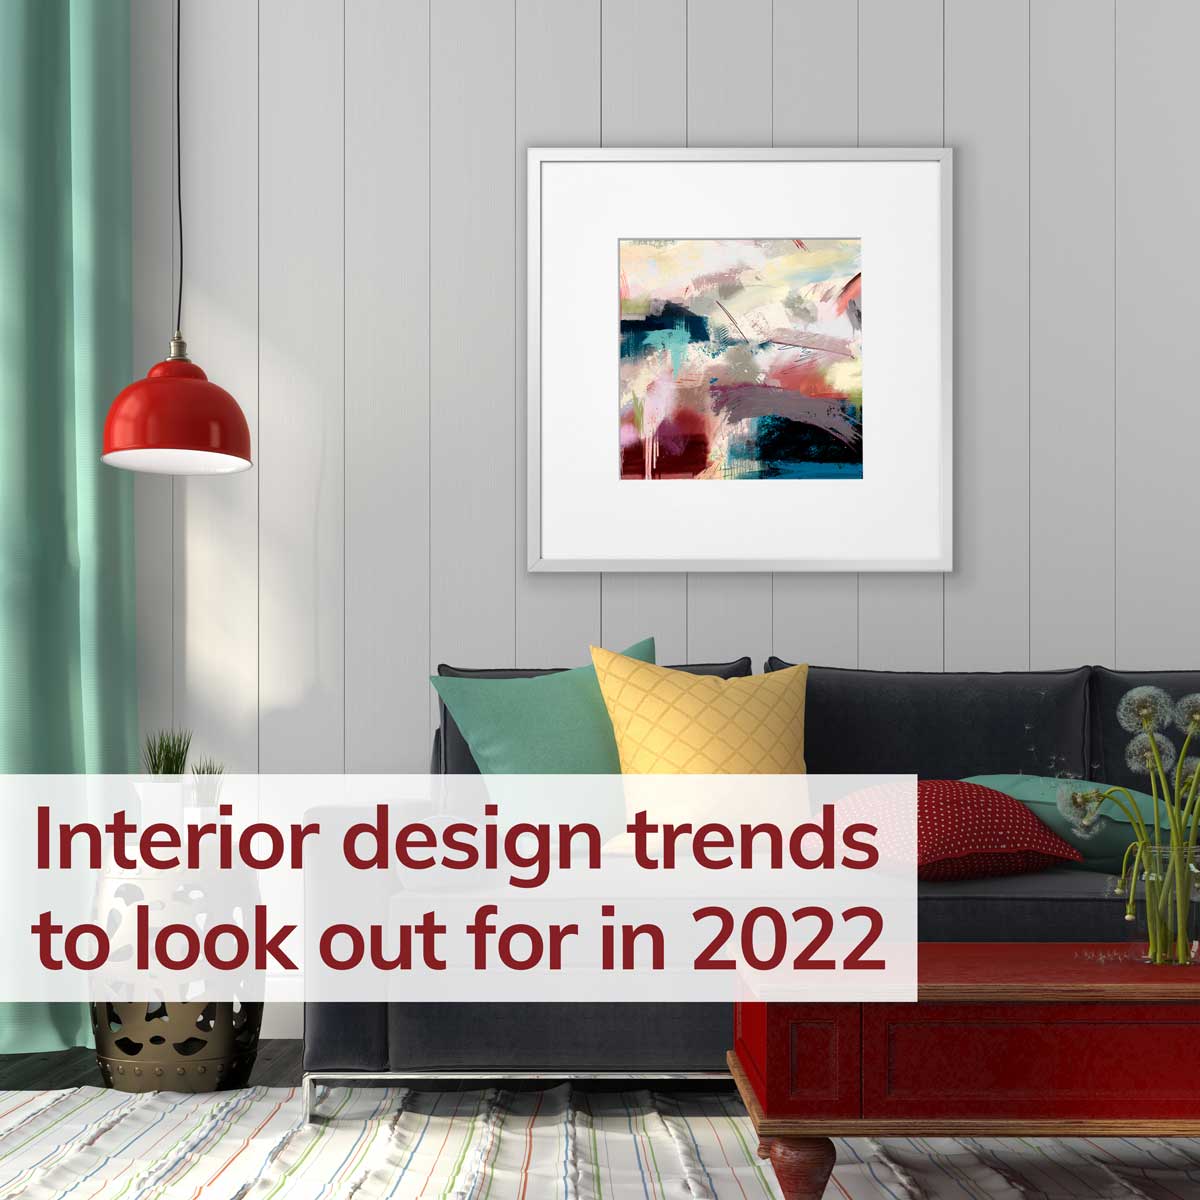 Interior design trends to look out for in 2022